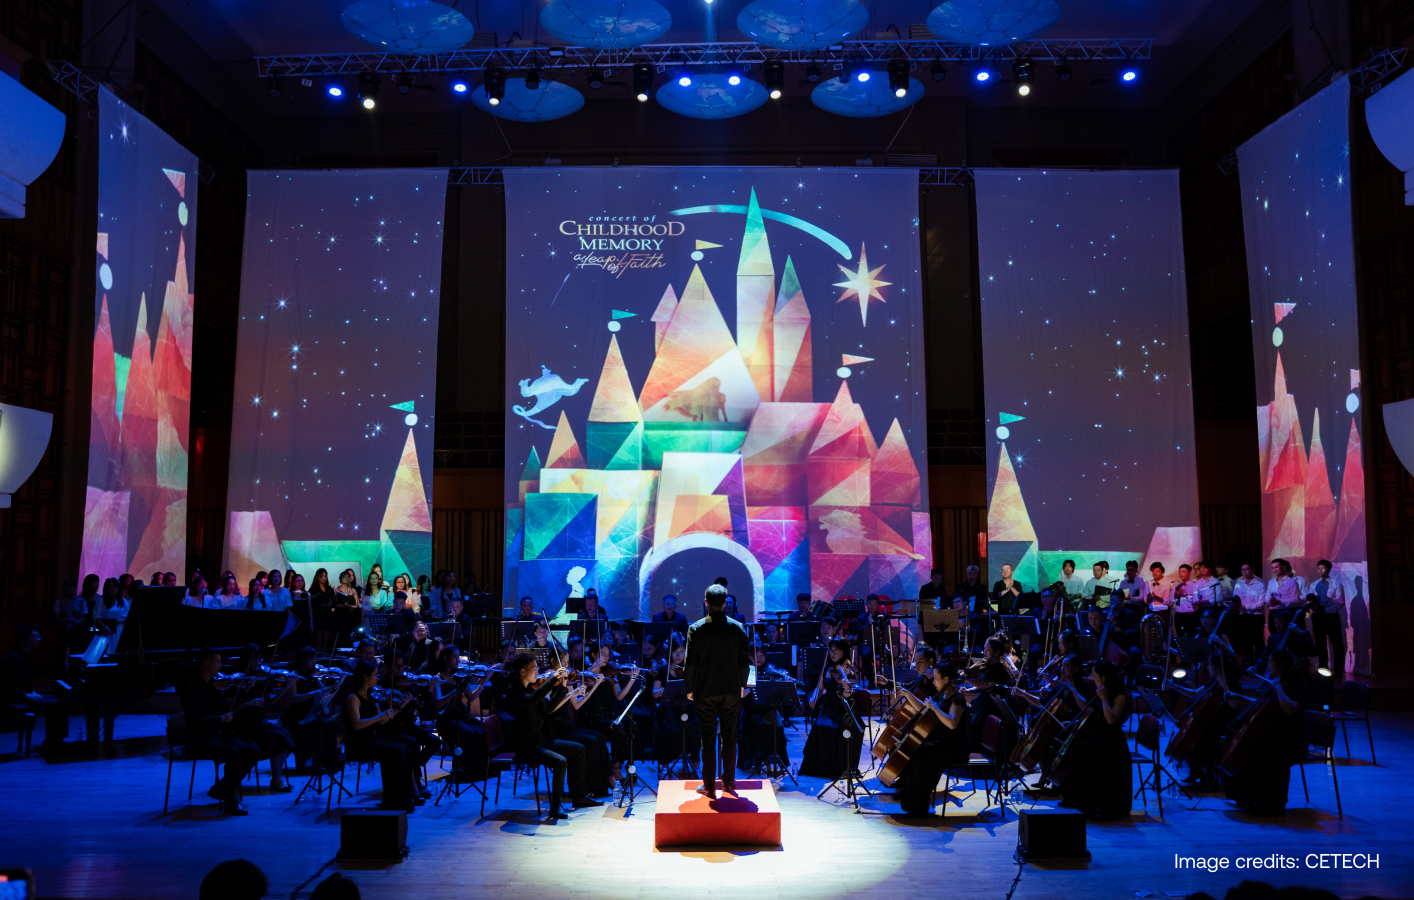 CETECH and disguise bring nostalgia to life for Disney’s Concert of Childhood Memory